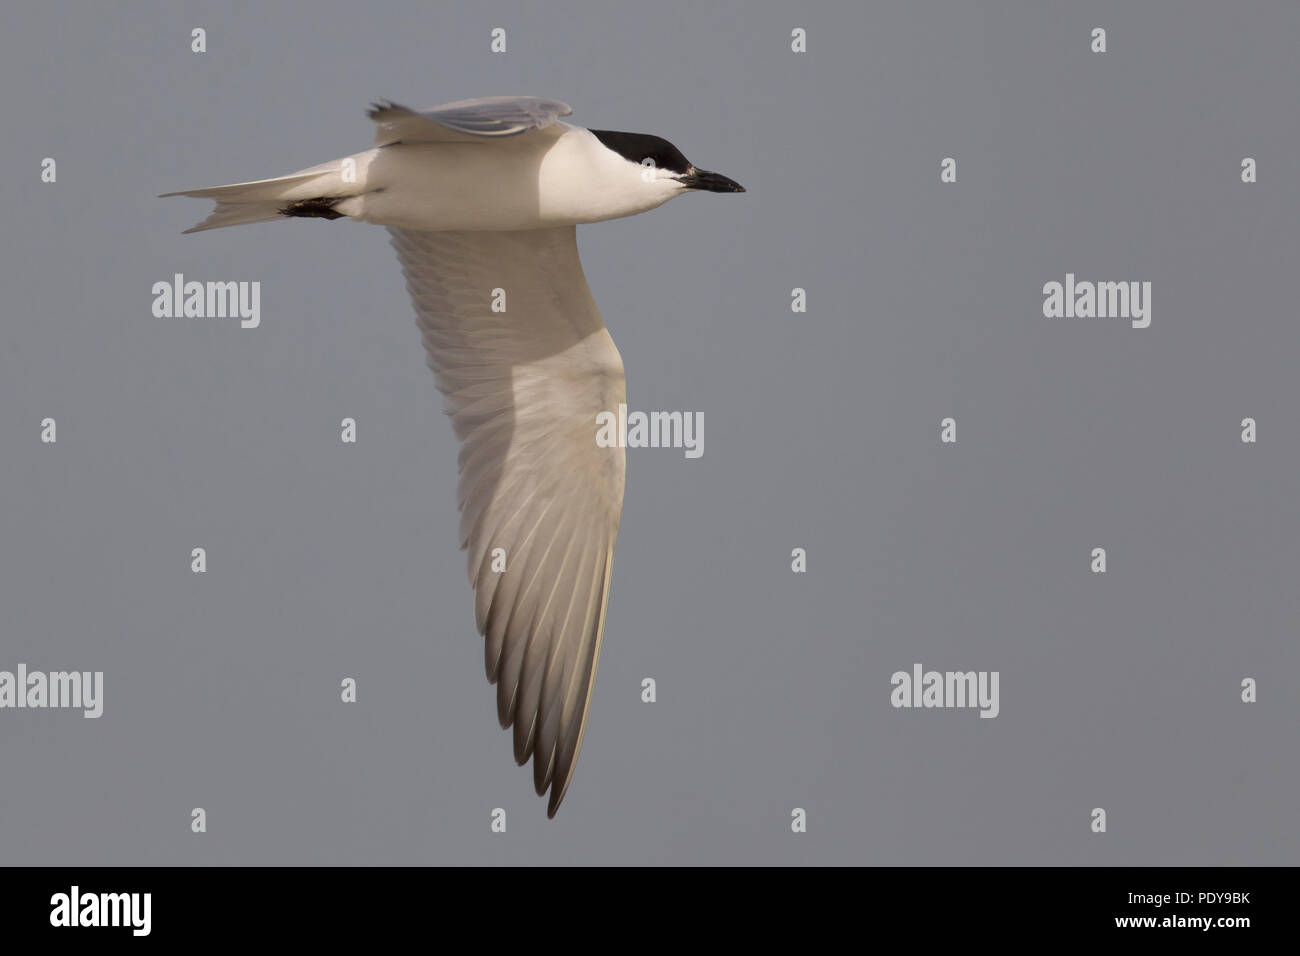 Flying Gull-billed Tern adultes ; Gelochelidon nilotica Banque D'Images